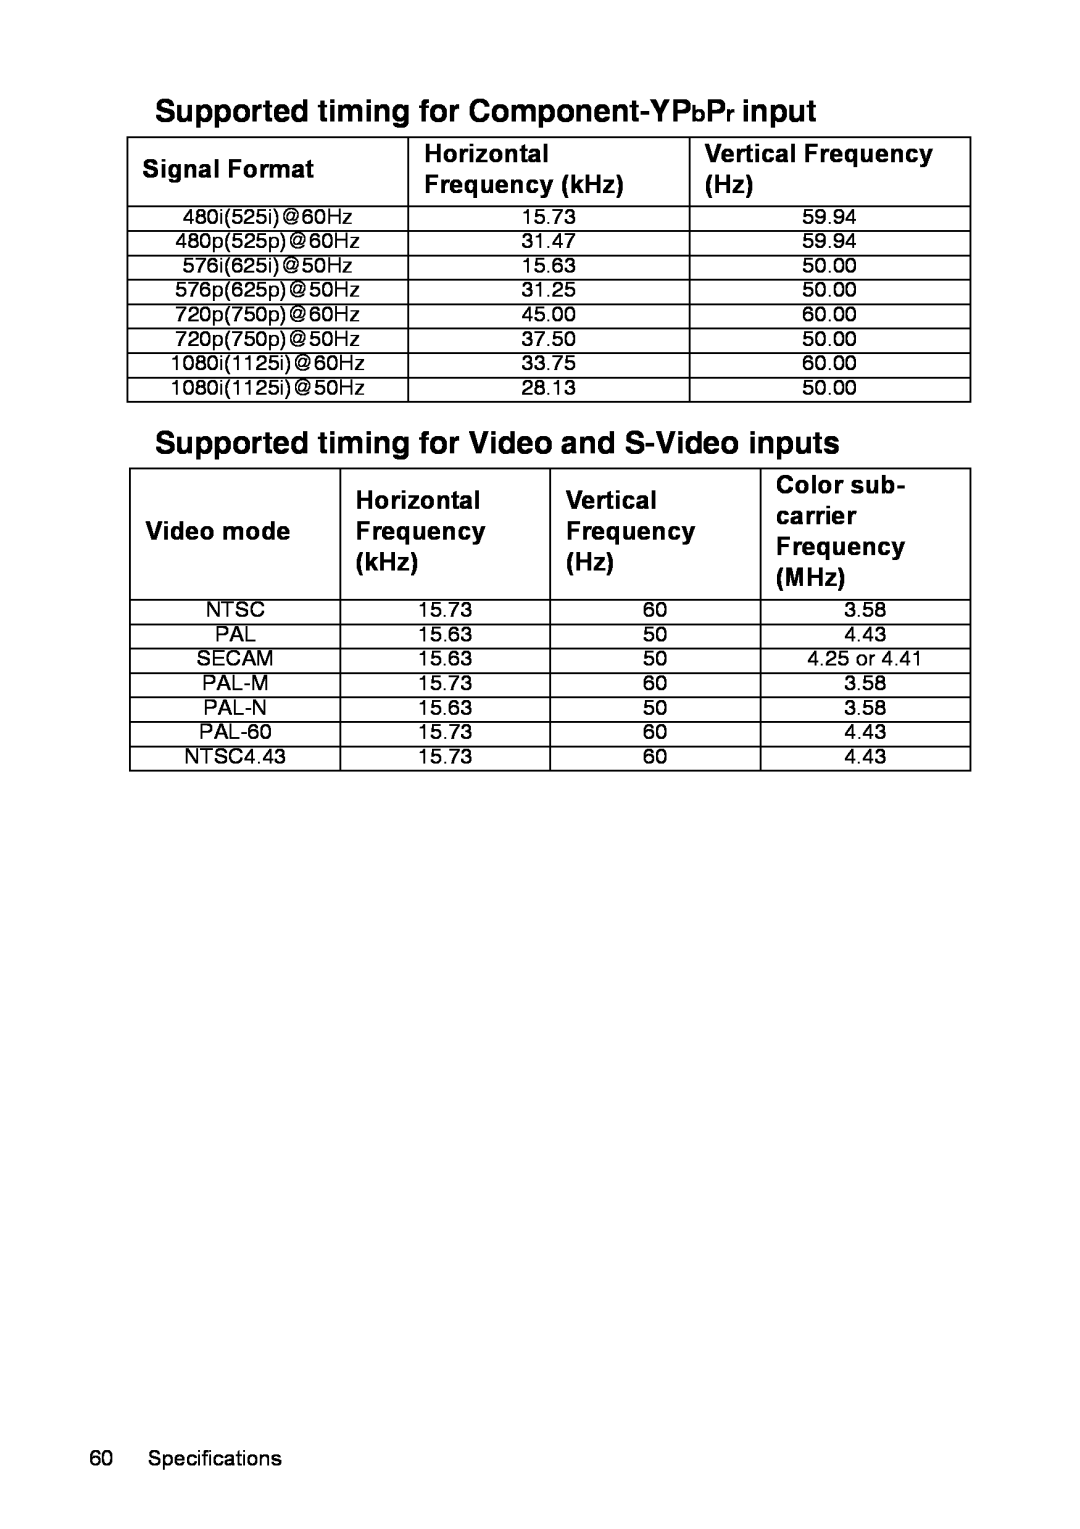 InFocus XS1 Supported timing for Component-YPbPr input, Supported timing for Video and S-Video inputs, Specifications 